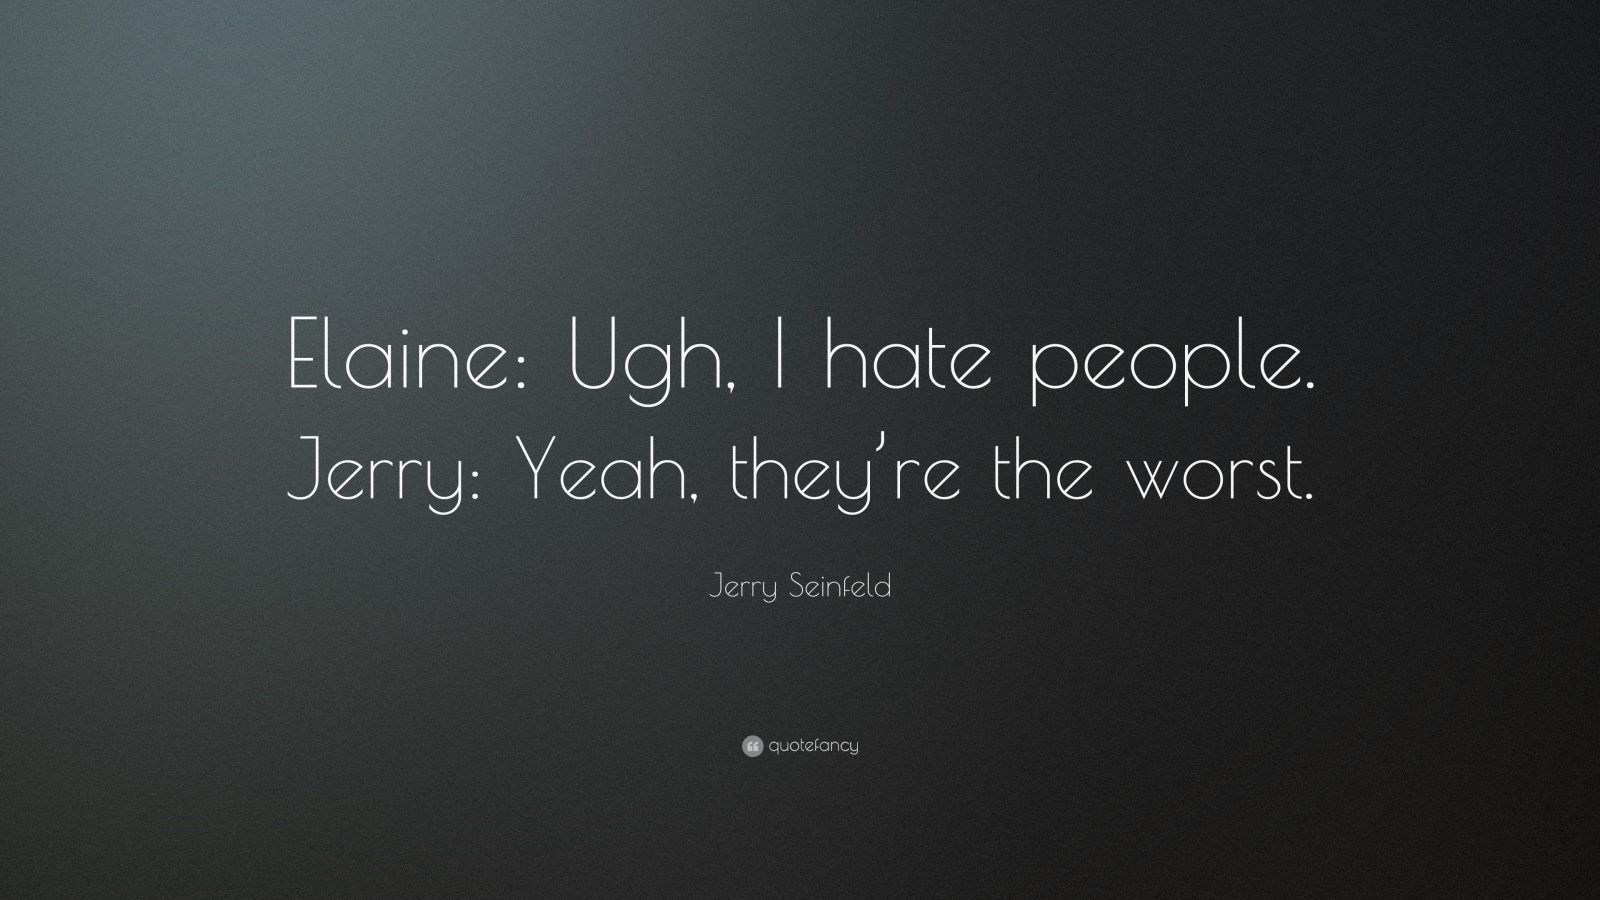 Jerry Seinfeld Quote: “Elaine: Ugh, I hate people. Jerry: Yeah